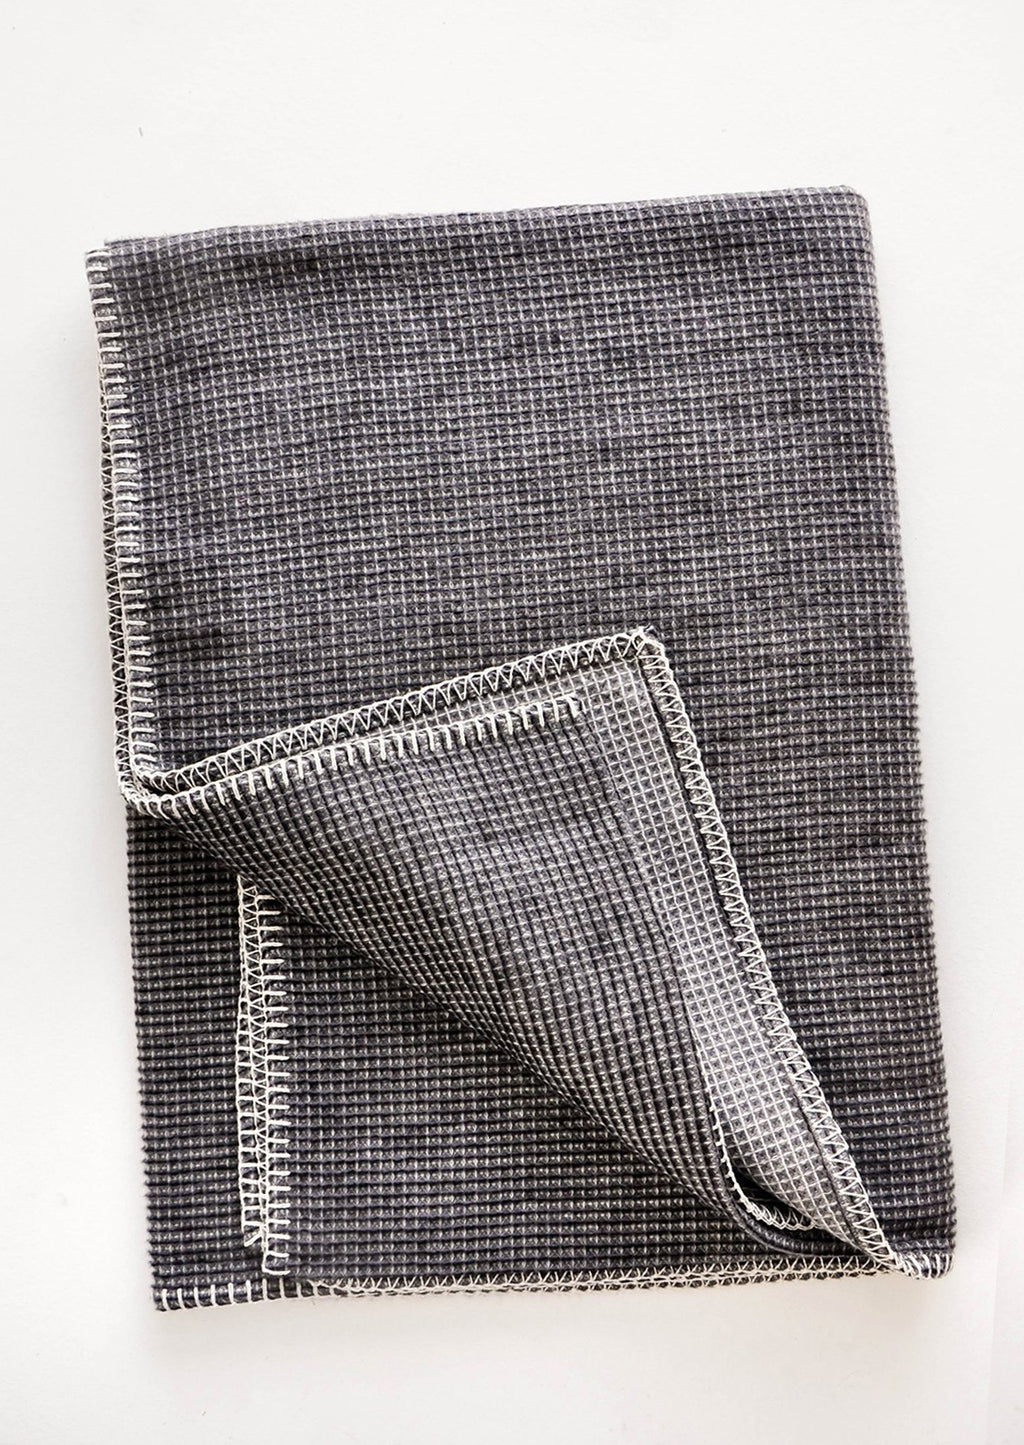 Dark Grey: Waffle Textured Cotton Blend Blanket in Charcoal with White Whipstitch Trim along edges